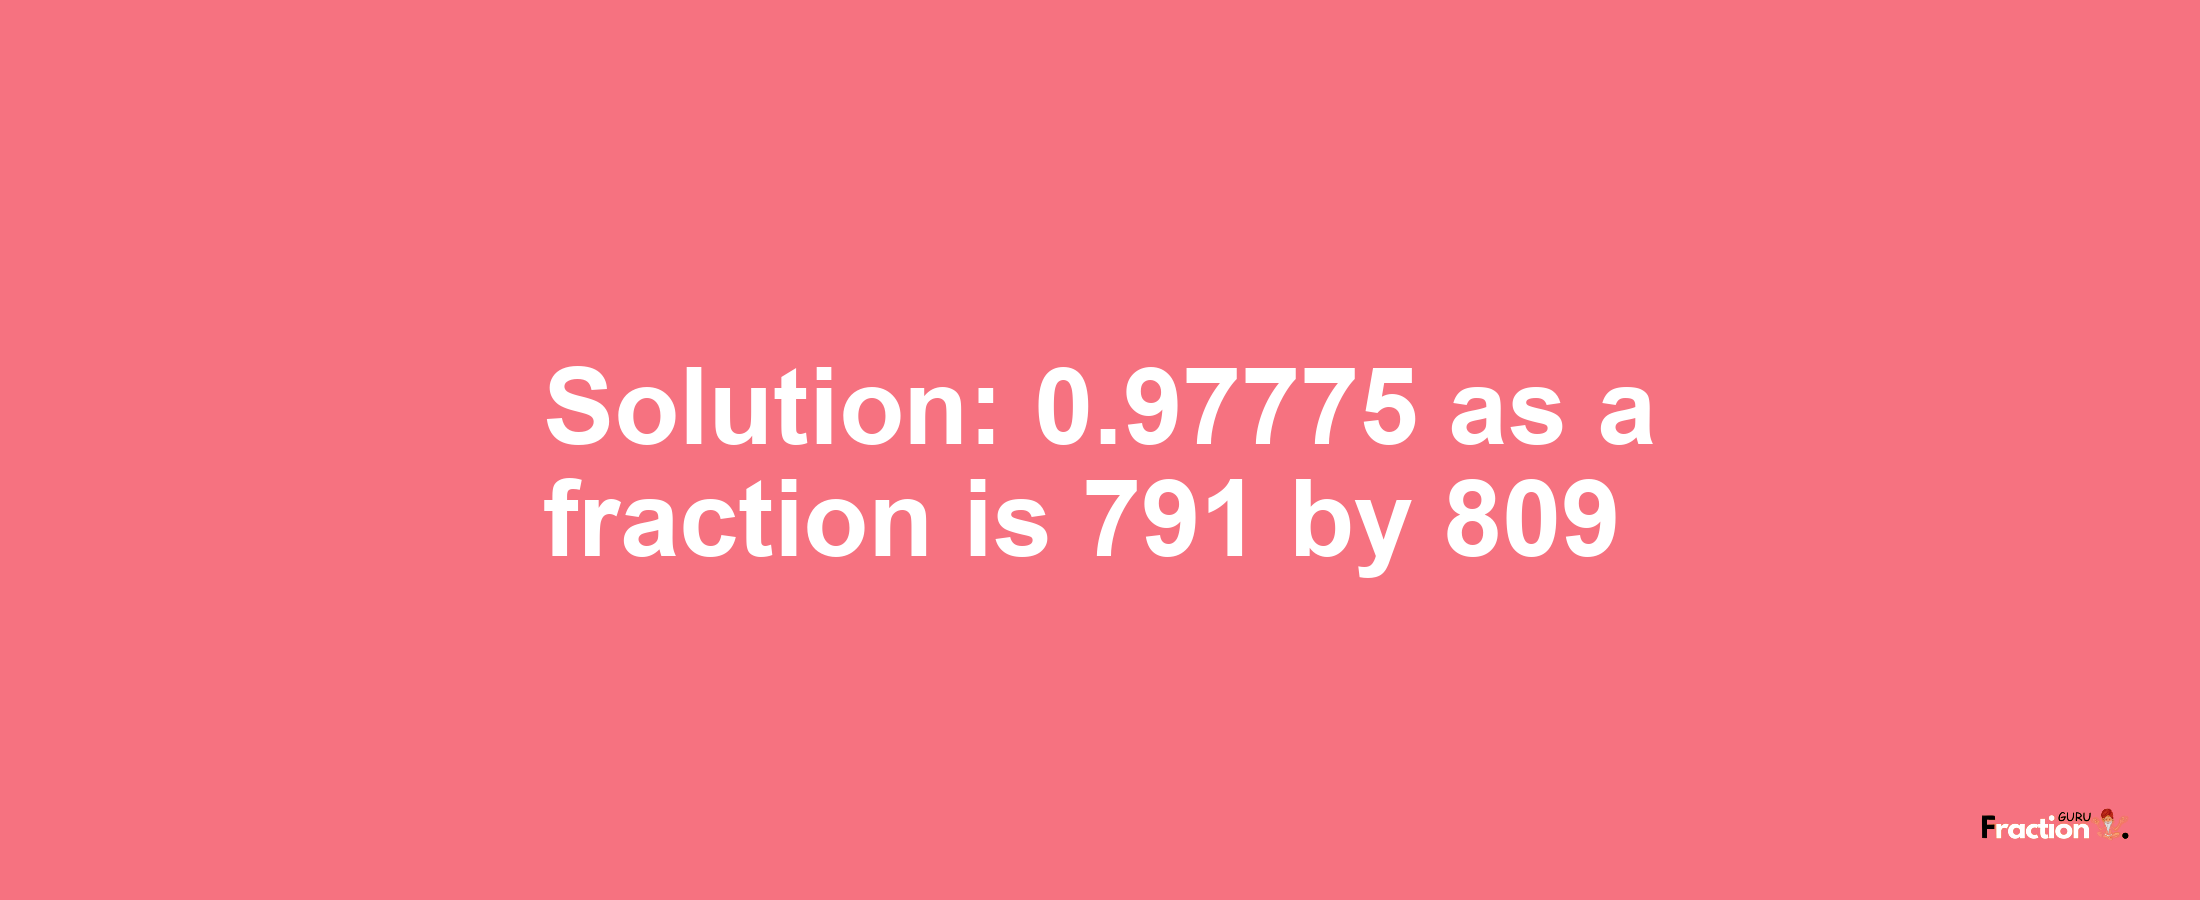 Solution:0.97775 as a fraction is 791/809